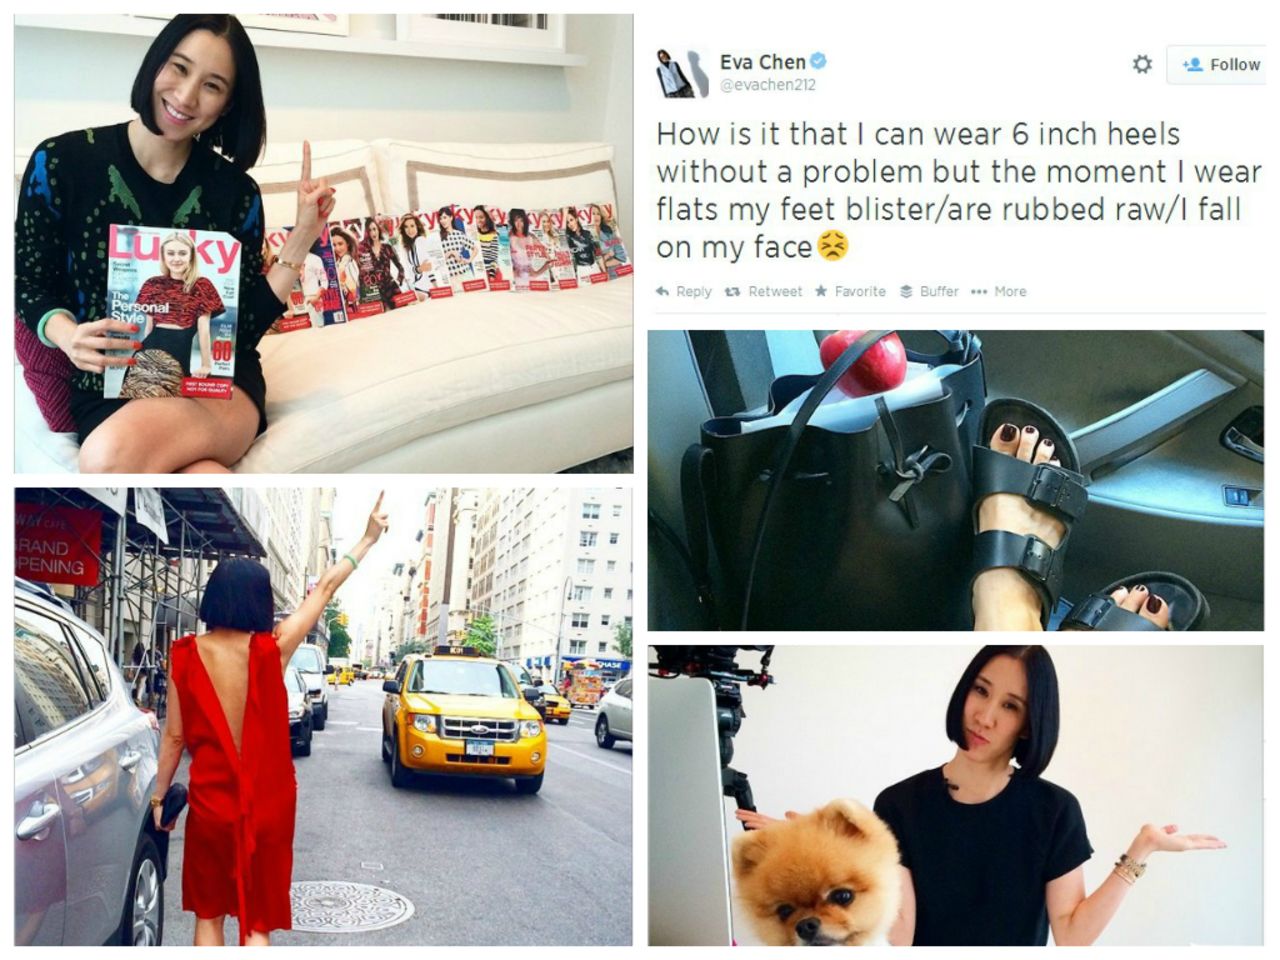 <strong>11. Eva Chen, Editor</strong><br /><a href="http://instagram.com/evachen212" target="_blank" target="_blank"><strong>Instagram</strong></a><strong> followers:</strong> 238,922<br /><a href="https://twitter.com/evachen212" target="_blank" target="_blank"><strong>Twitter</strong></a><strong> followers: </strong>81,400<br /><strong>Credits:</strong> Editor in Chief of <a href="http://www.luckymag.com/" target="_blank" target="_blank">Lucky Magazine</a><br /><strong>Posts:</strong> Red carpet selfies, fluffy dogs running riot in the office and quirky shoes. 